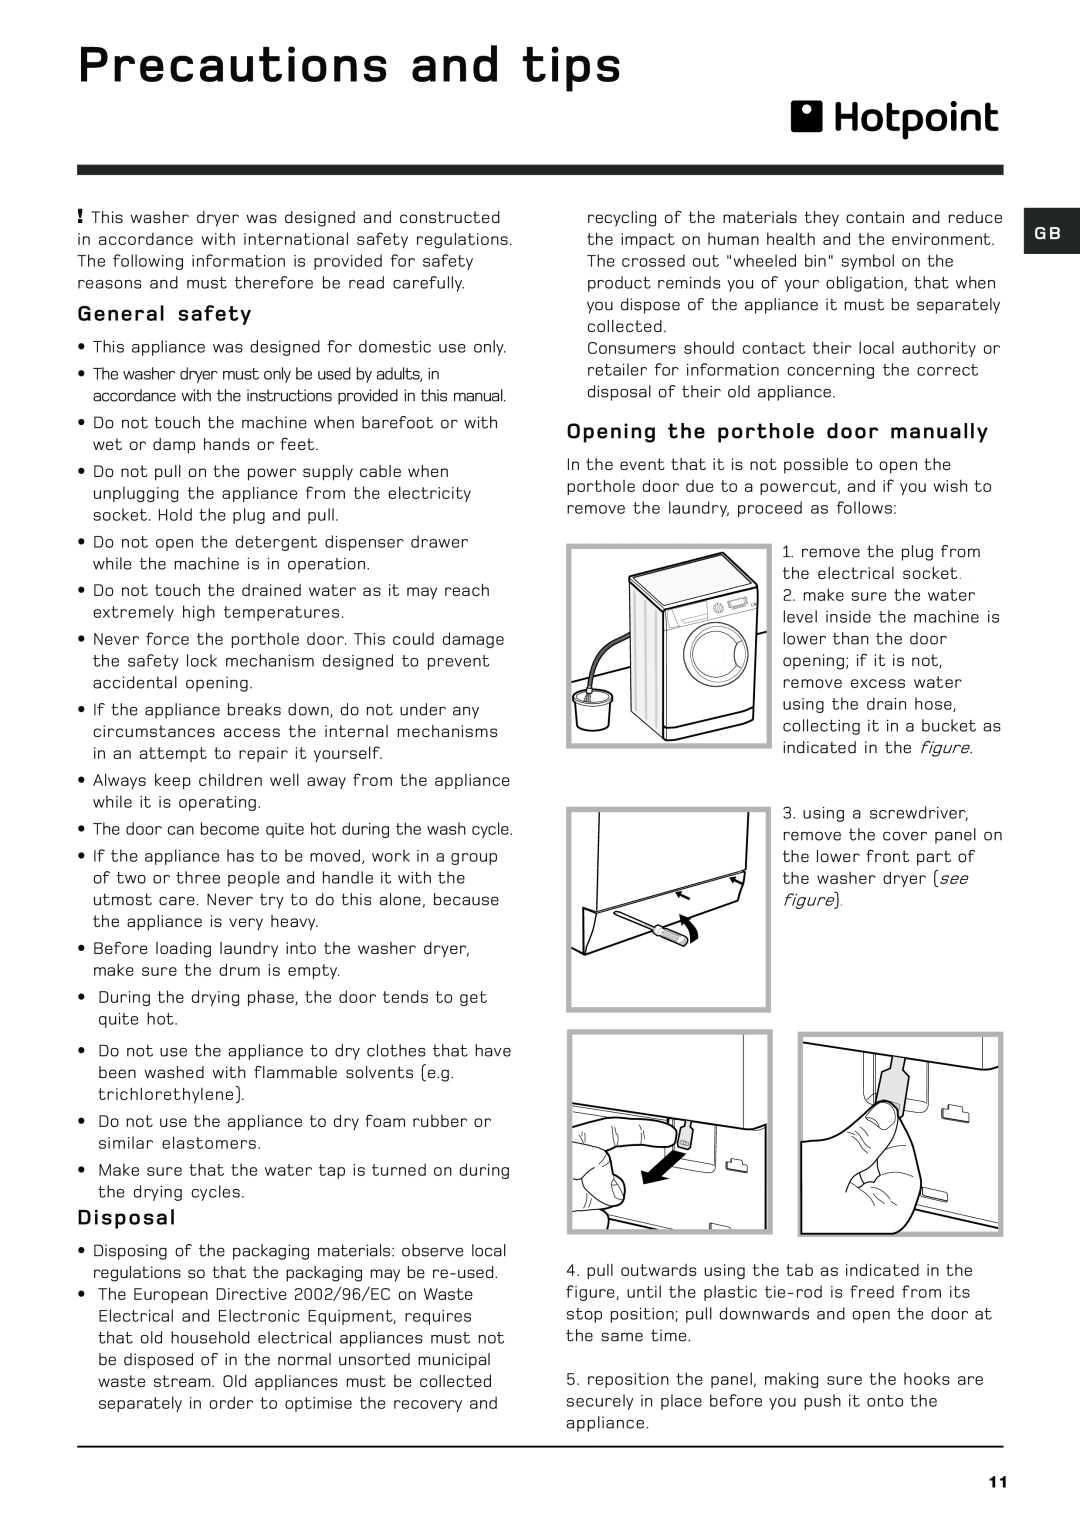 Hotpoint wdd960 Precautions and tips, General safety, Disposal, Opening the porthole door manually 